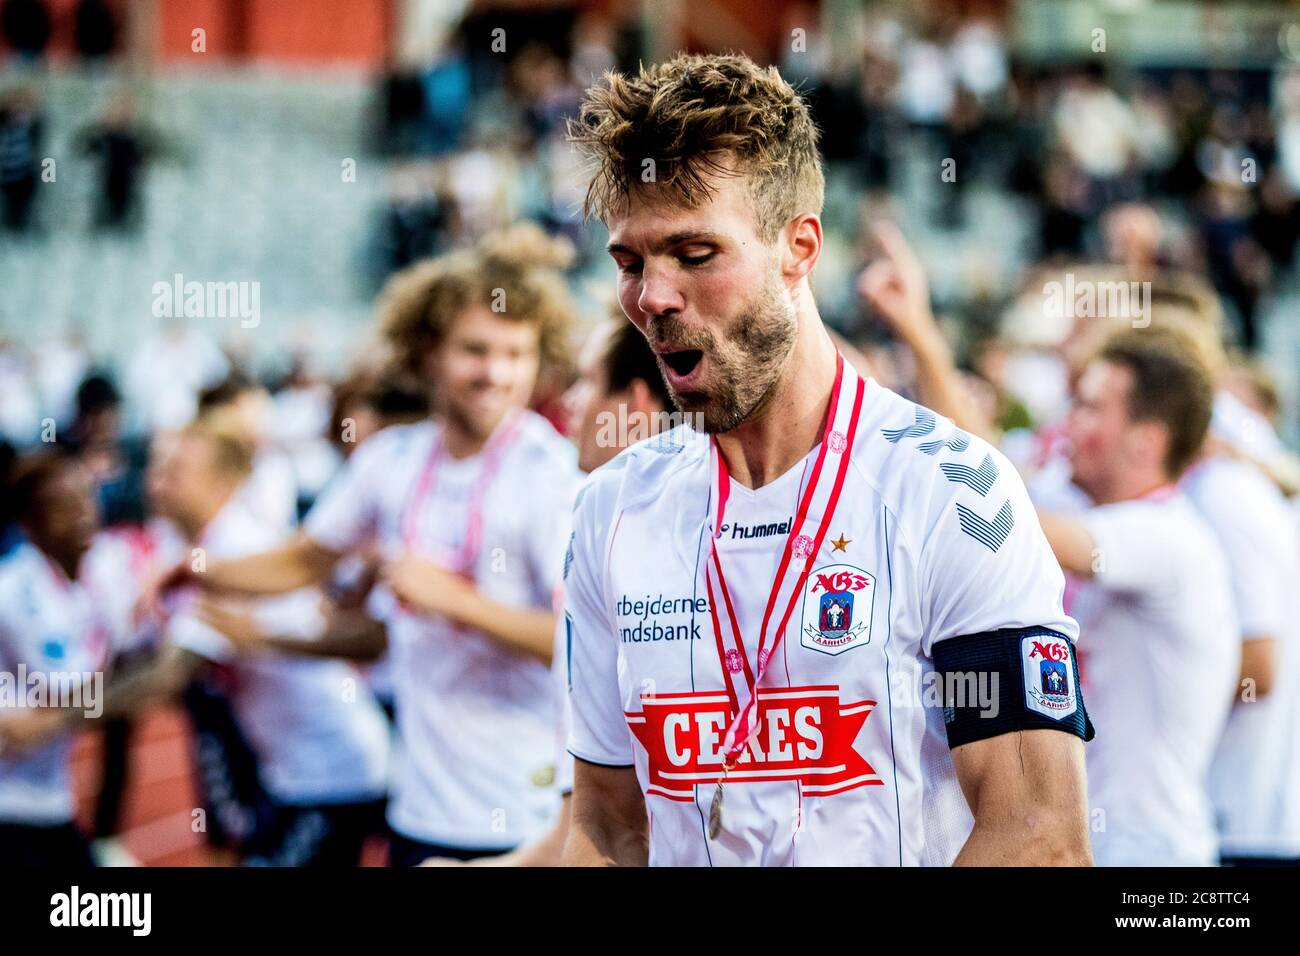 Aarhus, Denmark. 26th July, 2020. Patrick Mortensen of AGF is celebrating  bronze medals with the fans after the 3F Superliga match between AGF and  Brondby IF at Ceres Park in Aarhus. (Photo